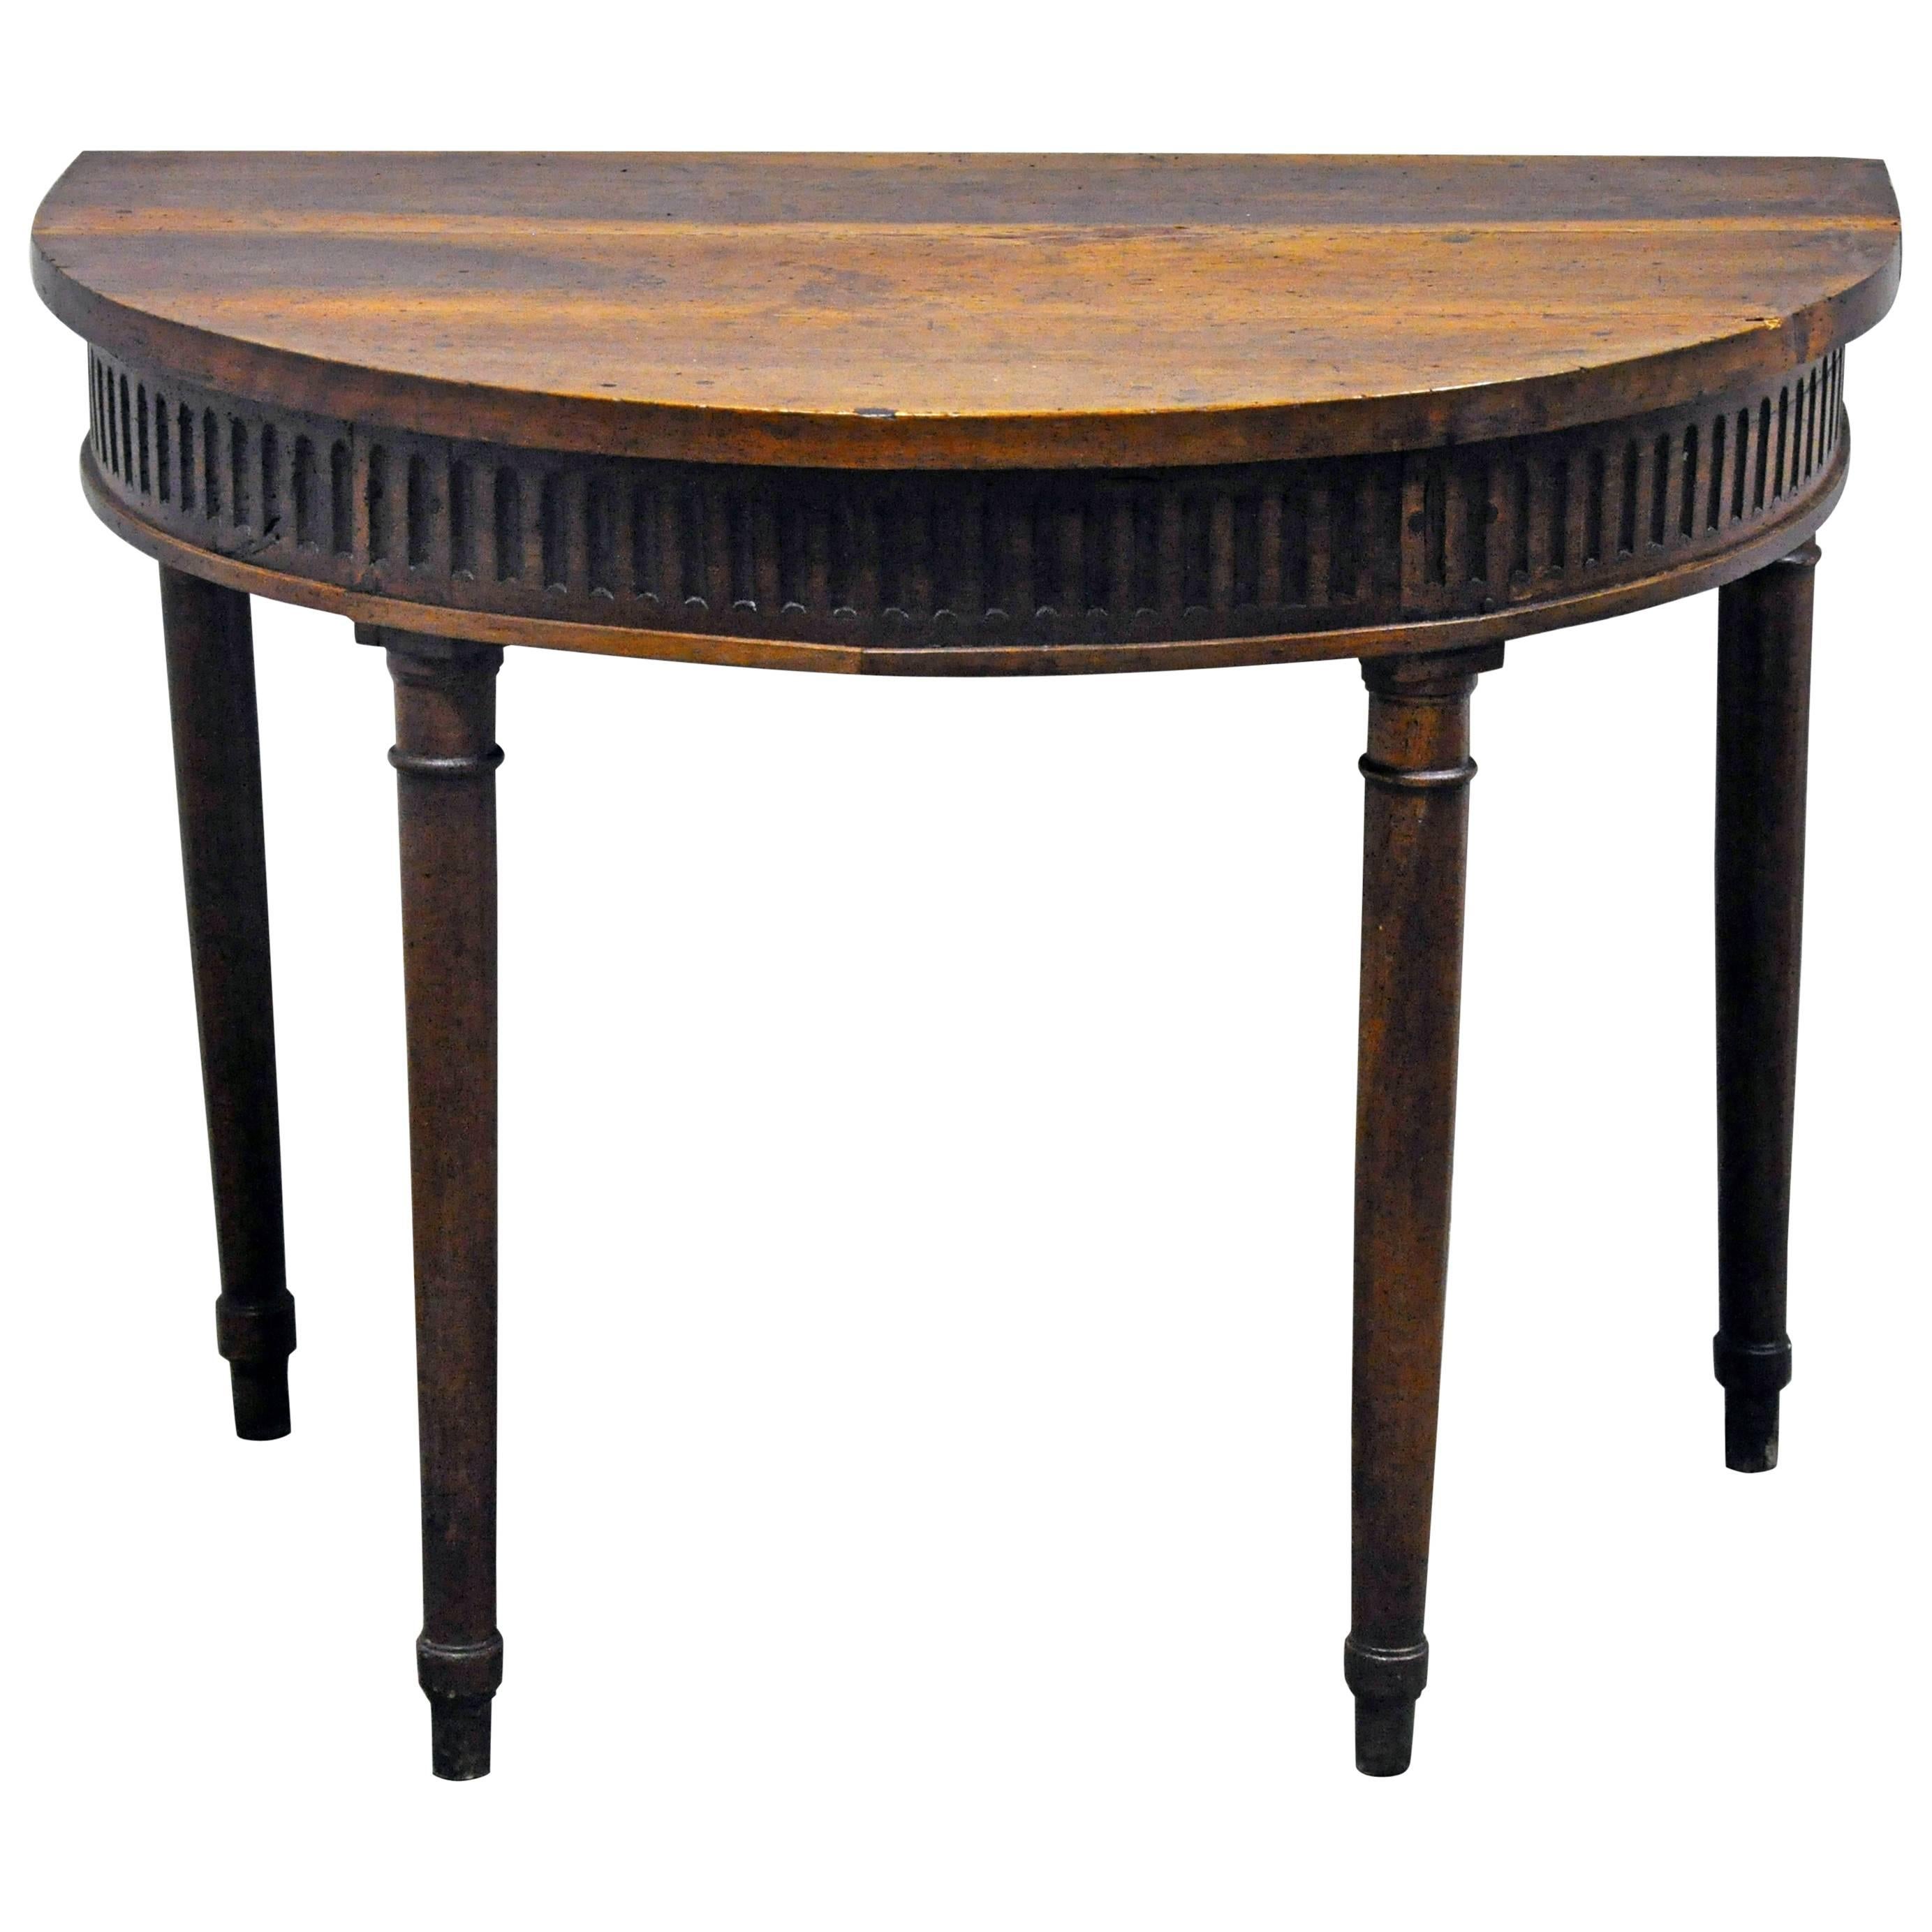 19th Century French Demilune Table in Walnut